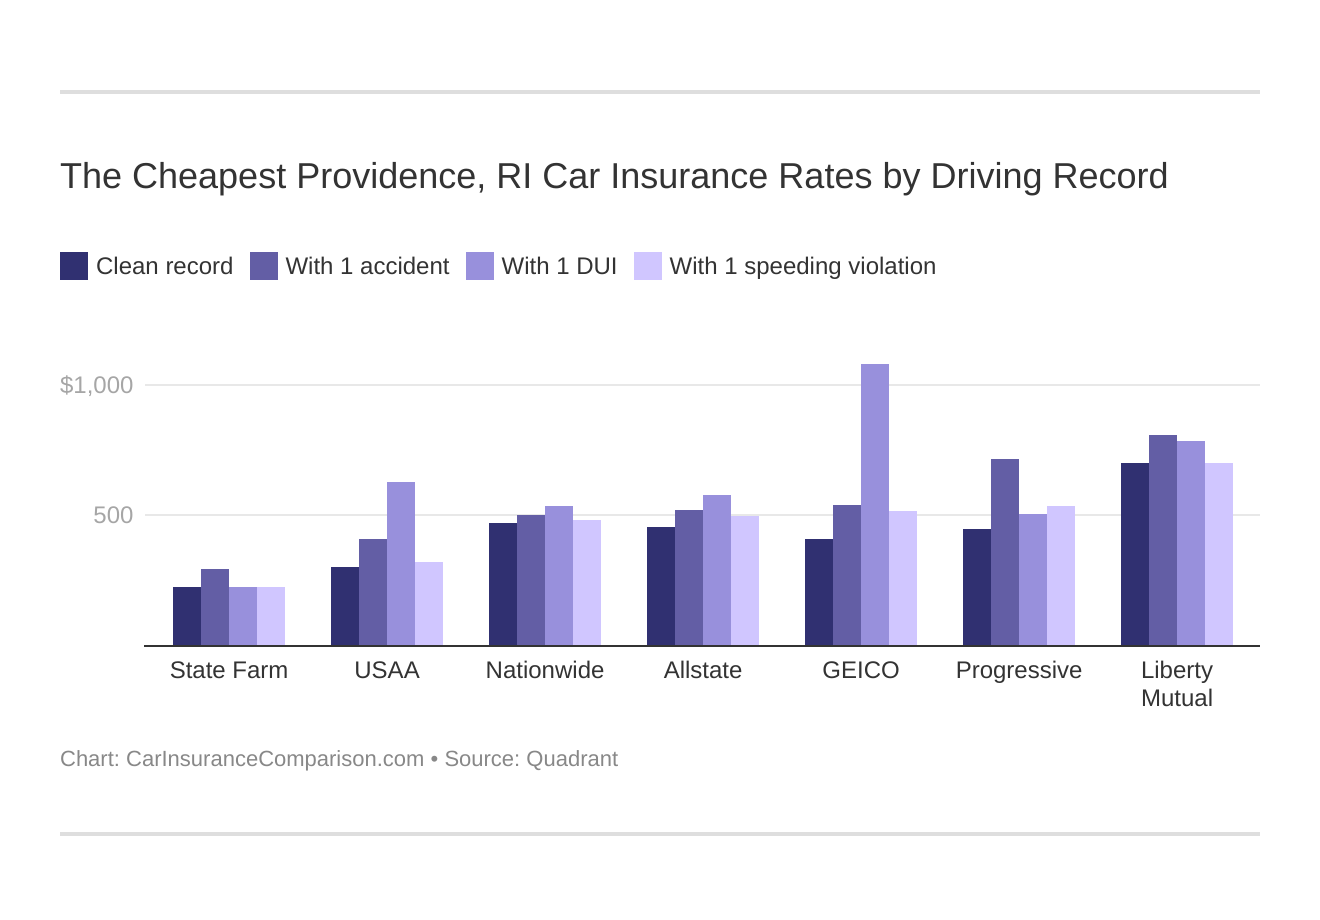 The Cheapest Providence, RI Car Insurance Rates by Driving Record